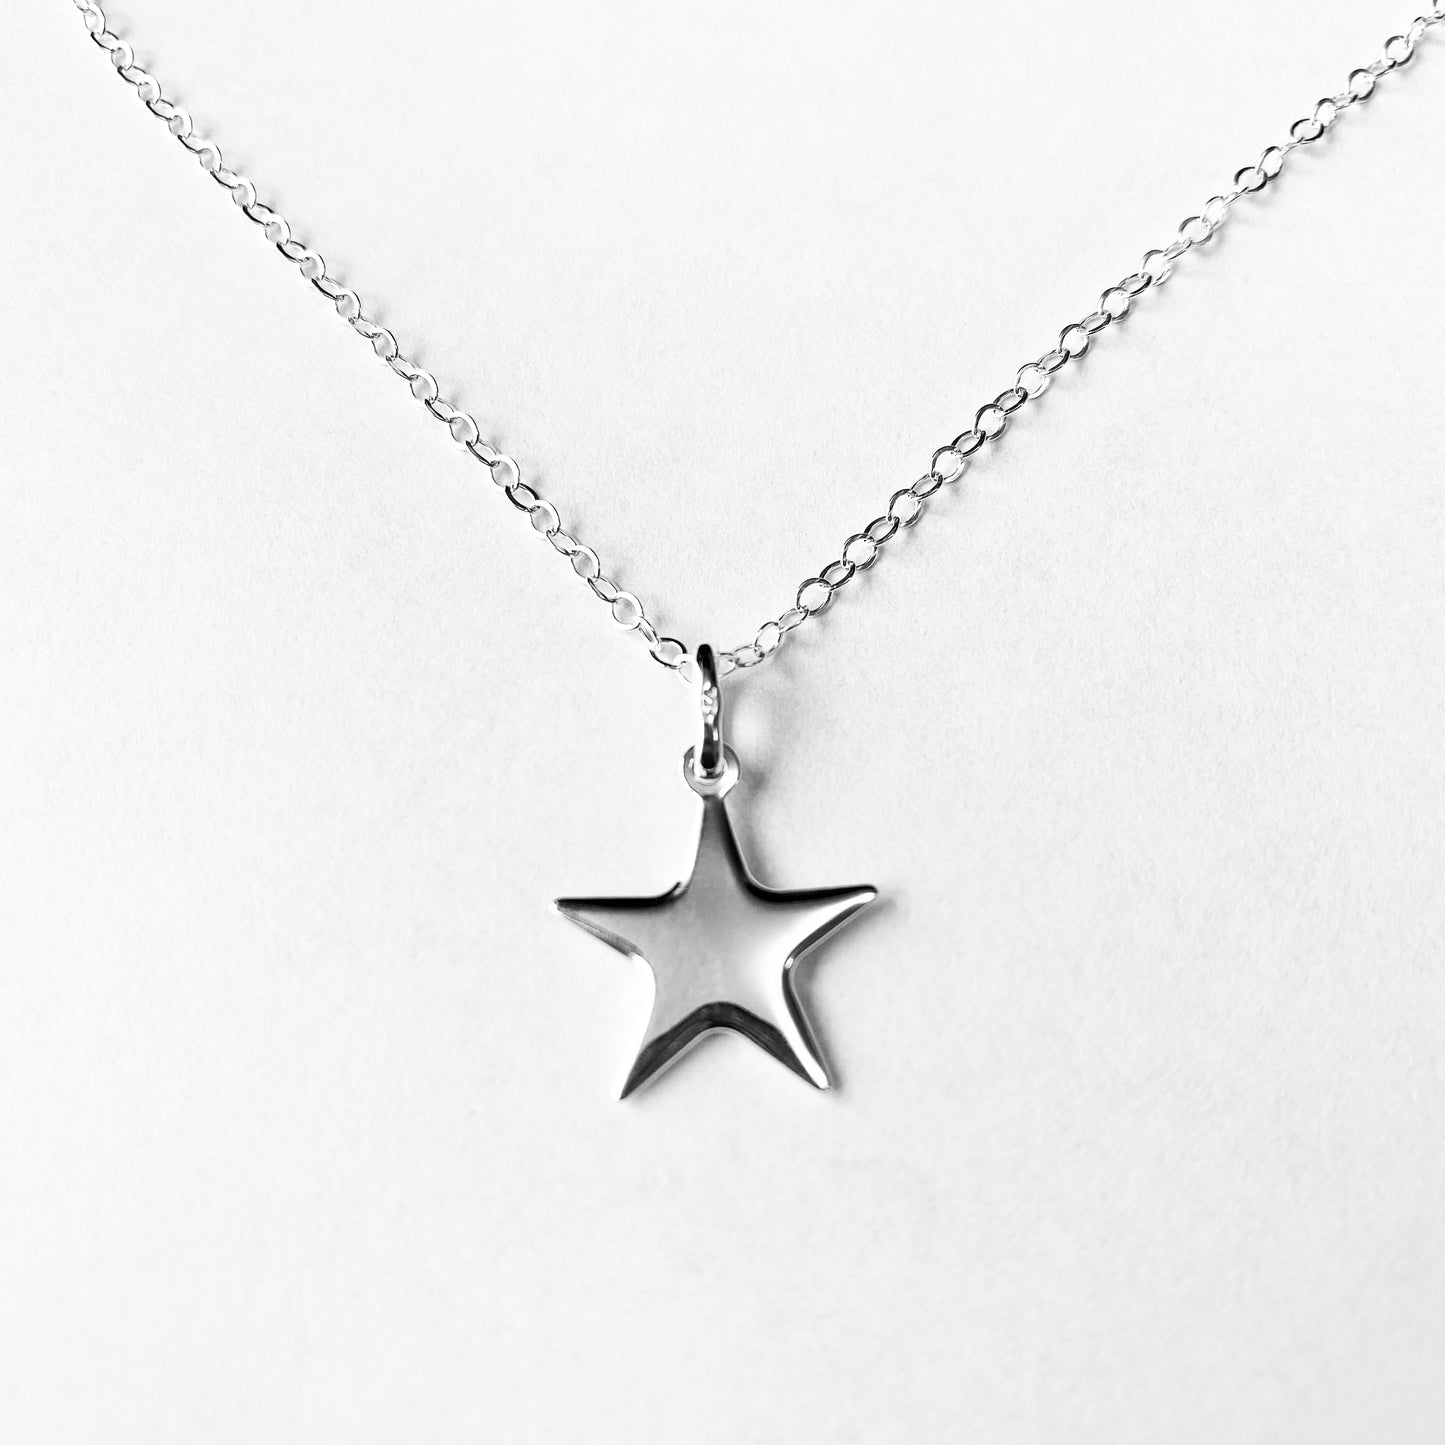 Shiny Star Sterling Silver Necklace close up by SOMMERSPARKLE